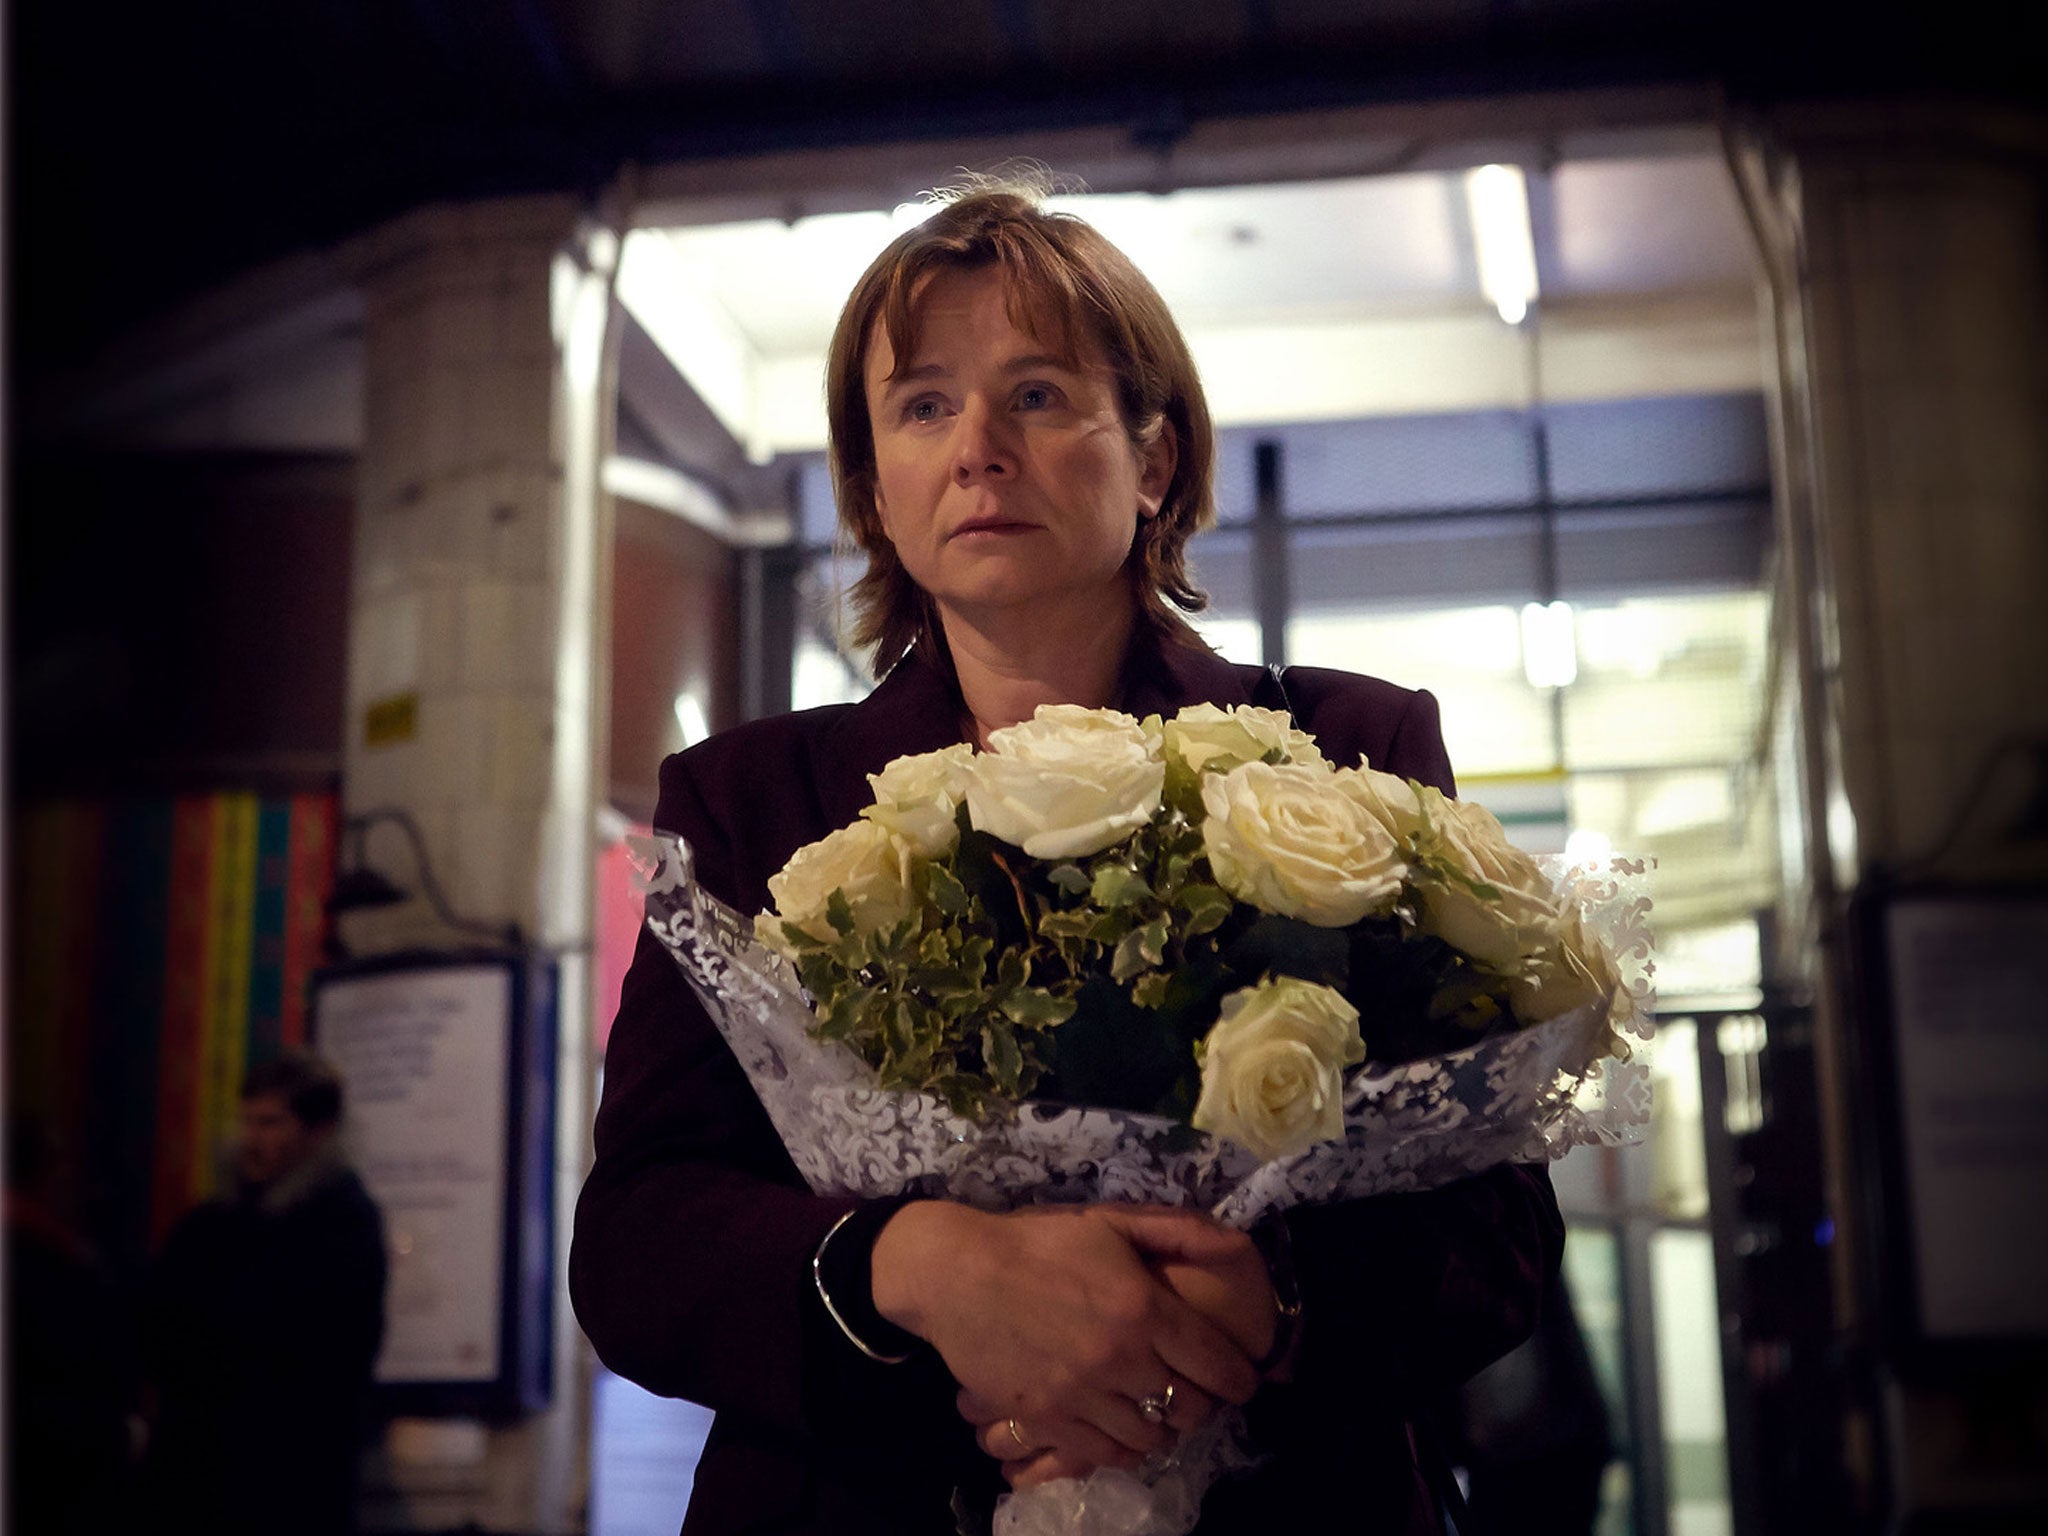 Oscar-nominated actress Emily Watson appears in the film